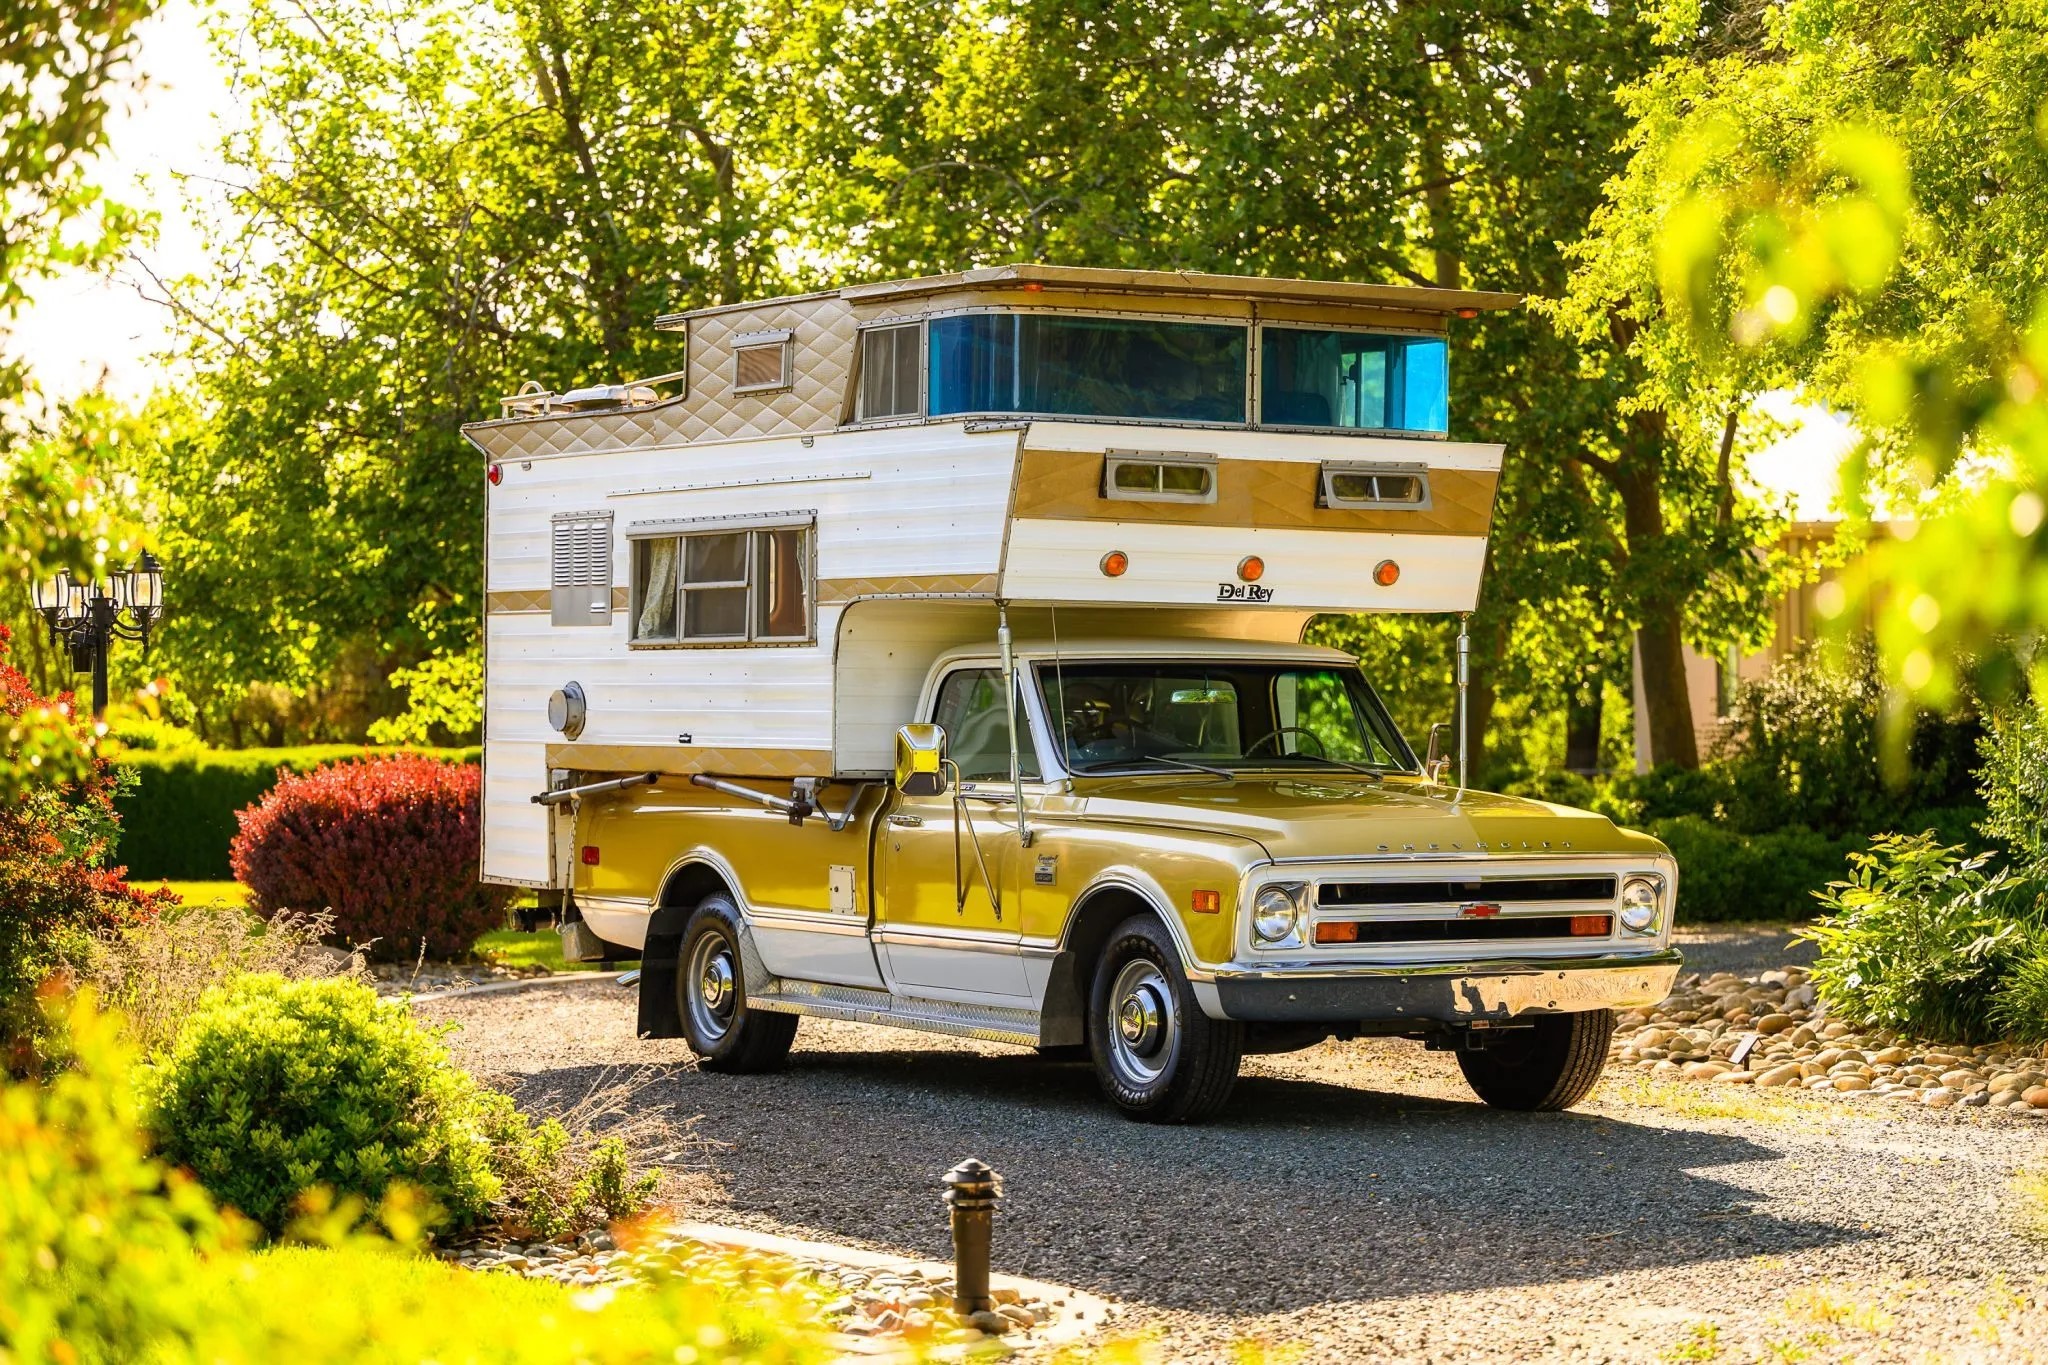 This 1968 Chevy C20 ‘Sky Lounge’ Camper For Sale Is the Only Way to Travel This Summer